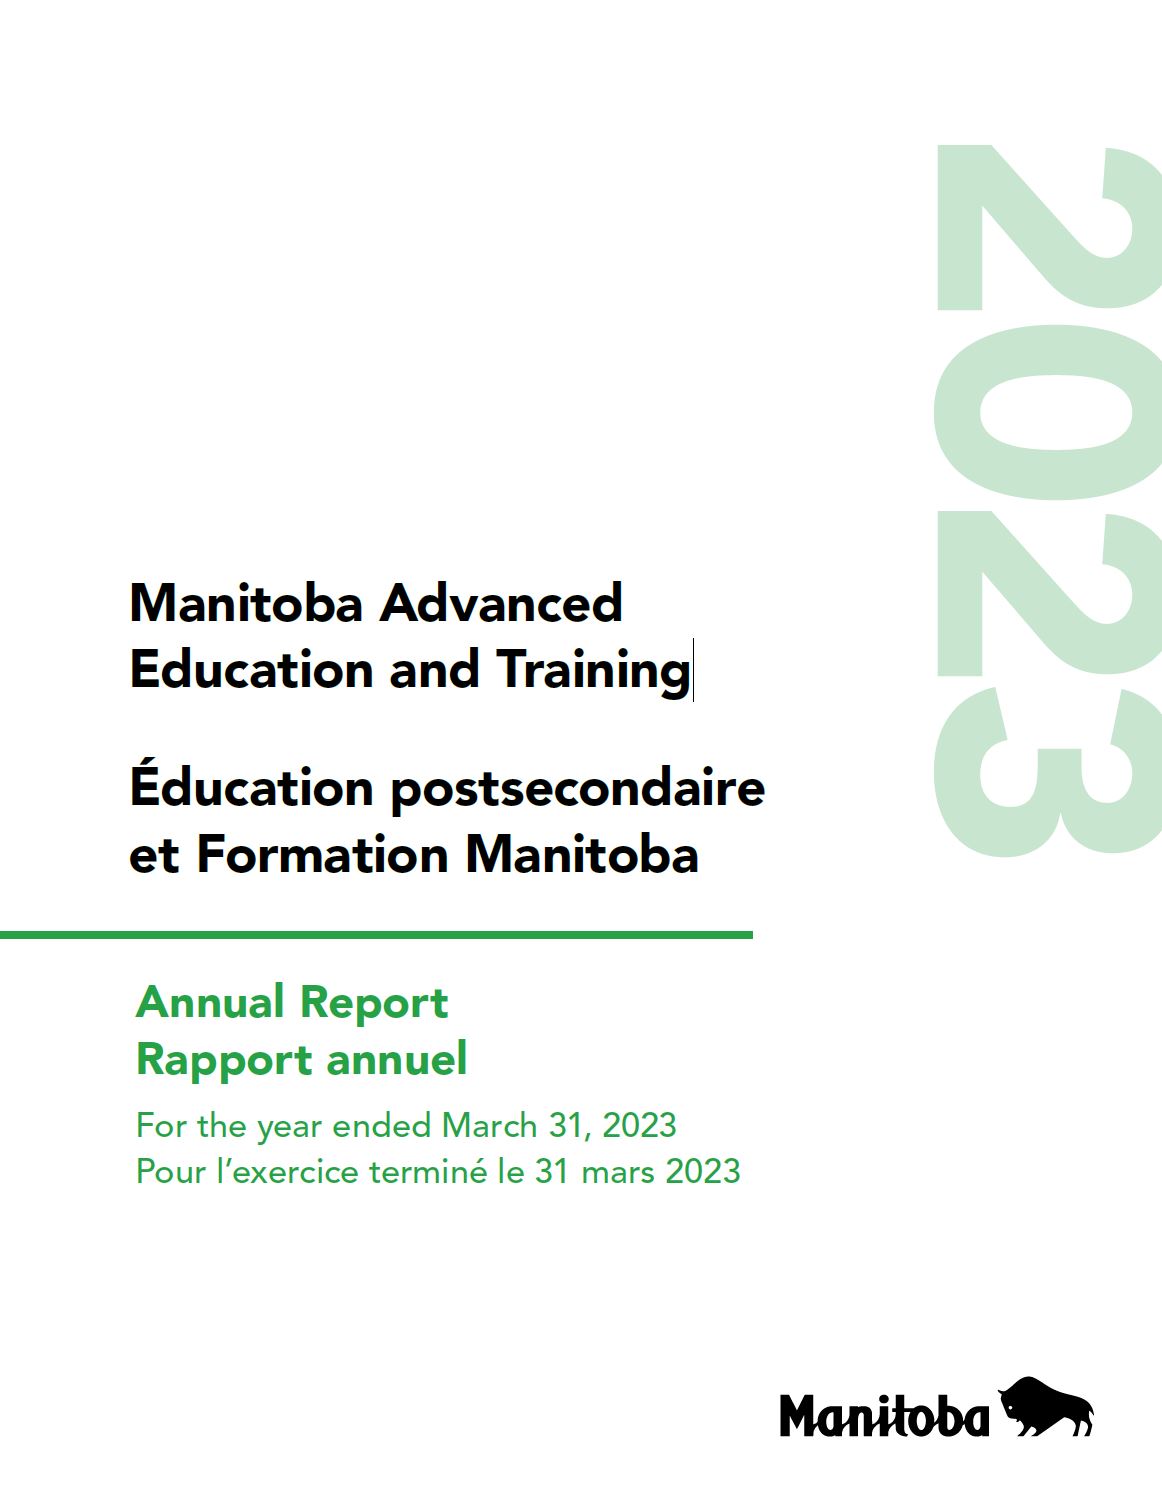 Thumbnail of Annual Report cover